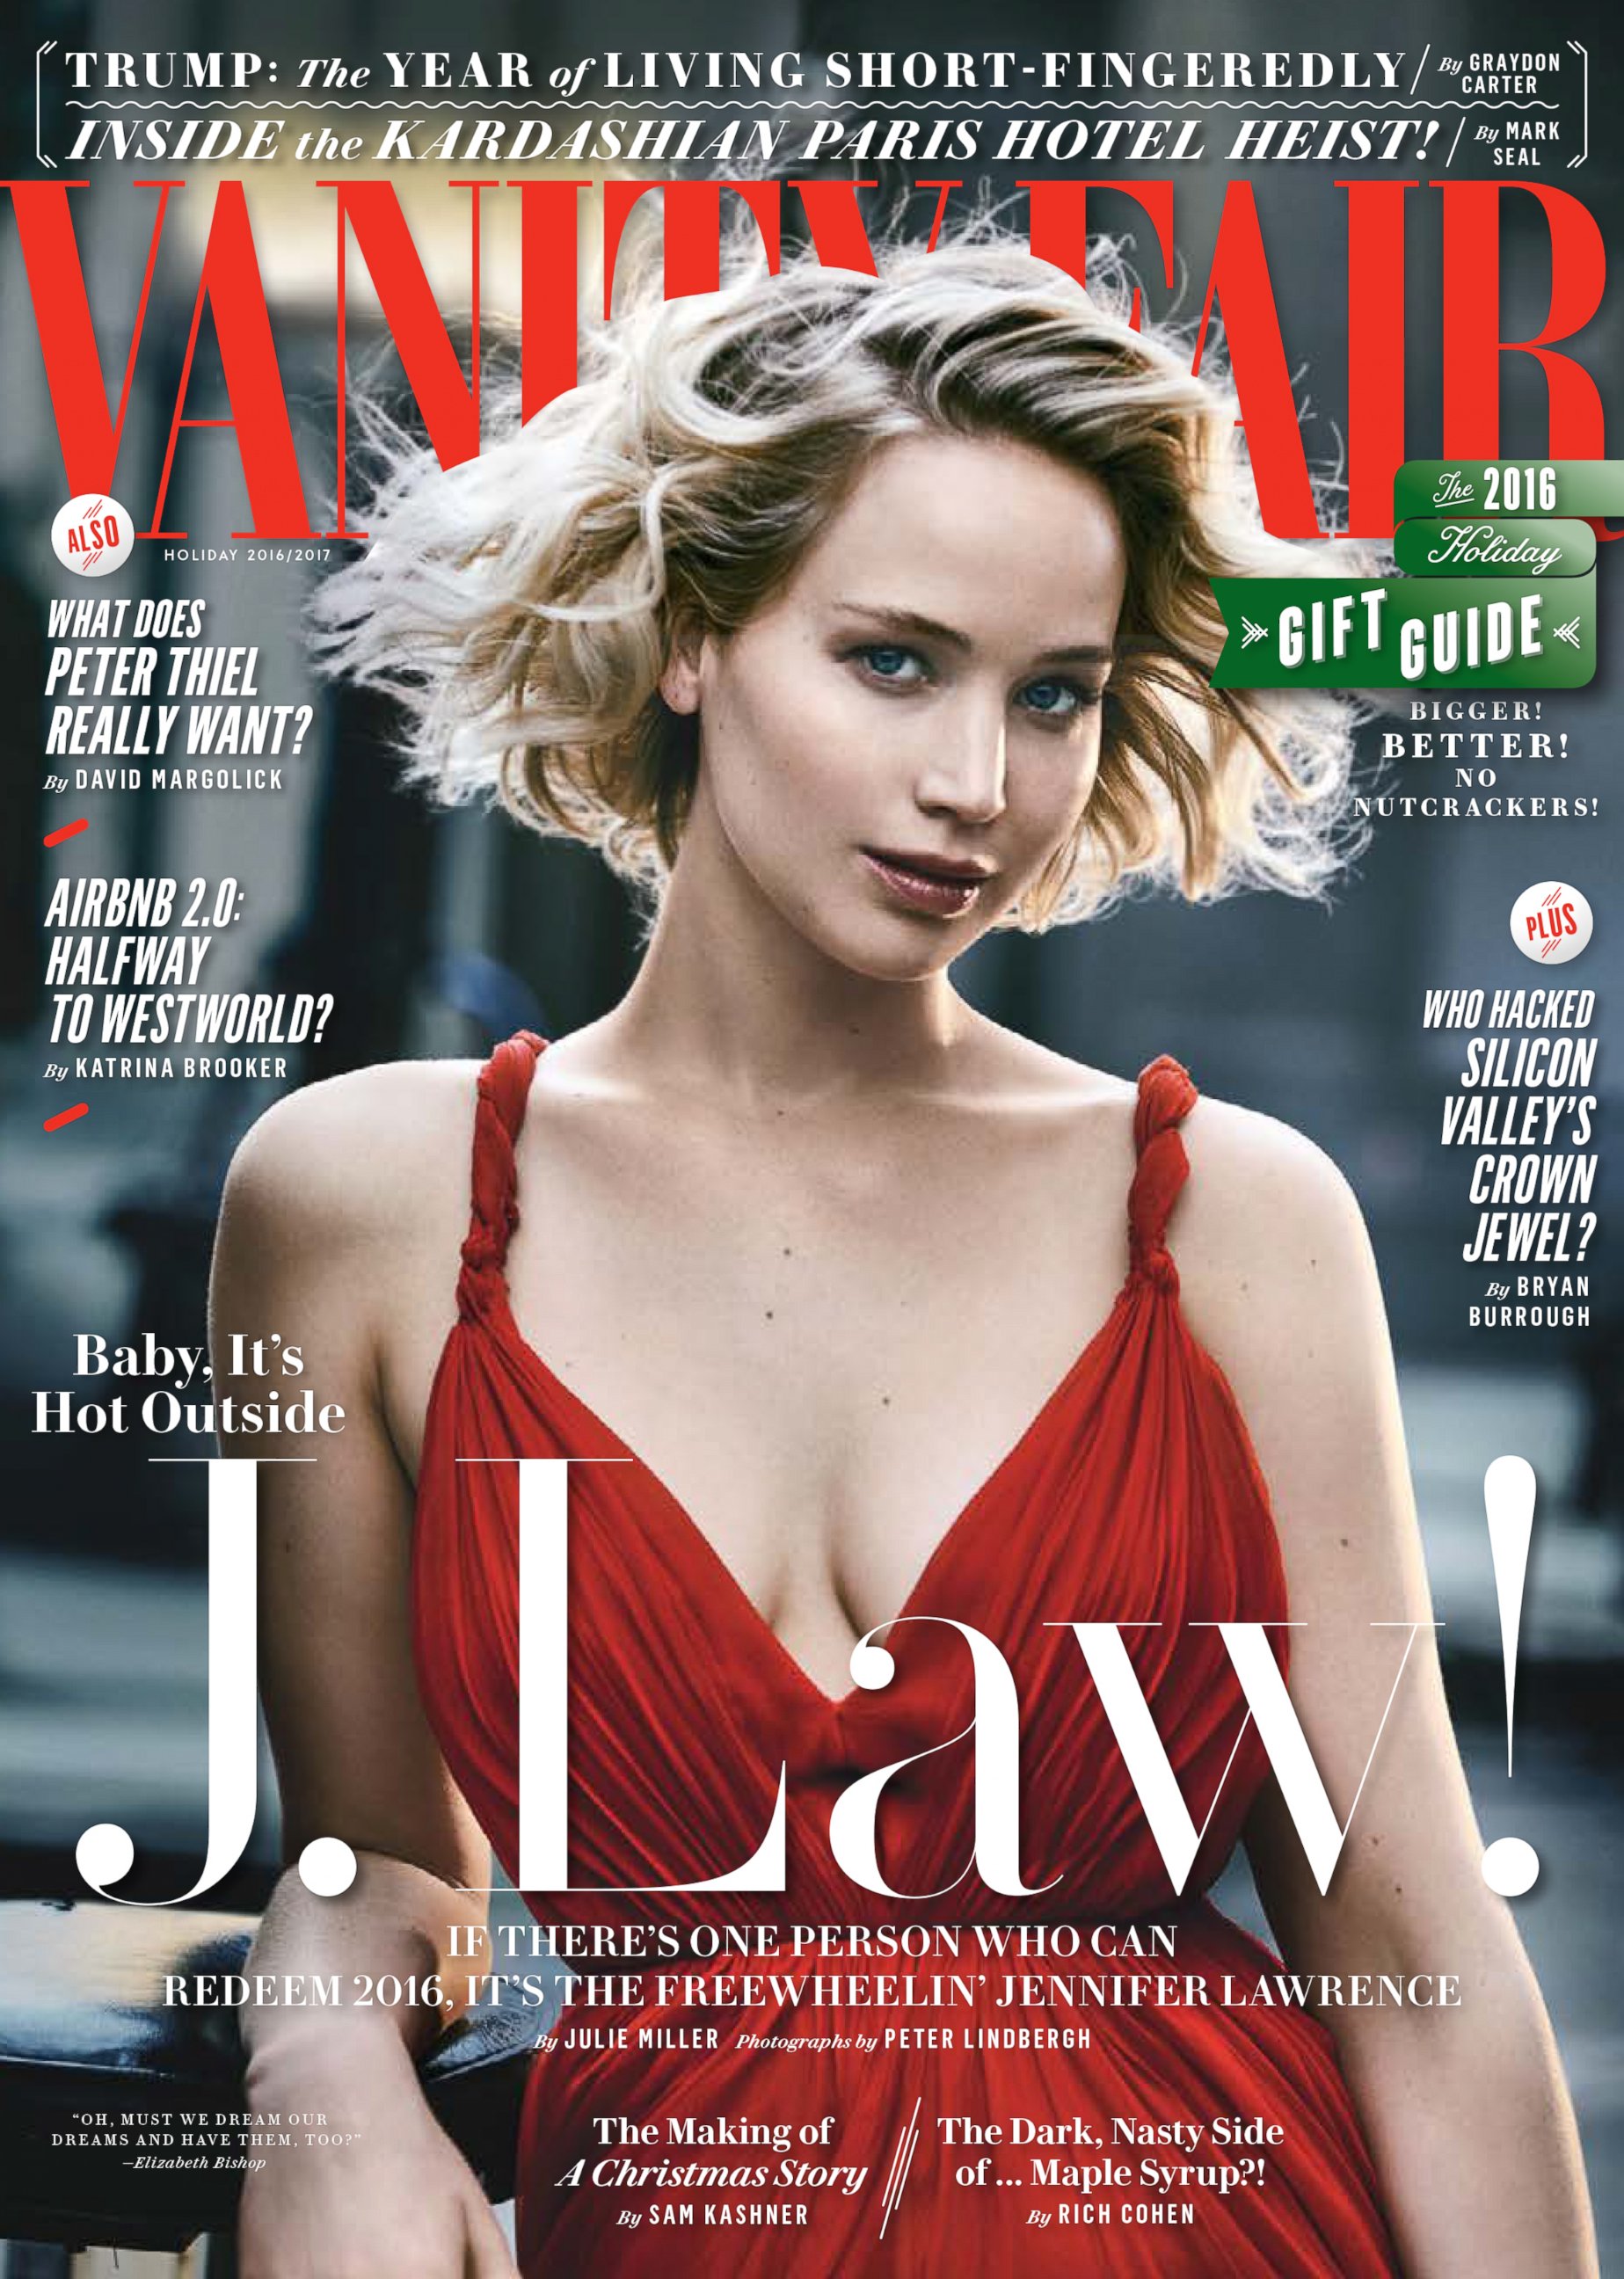 PHOTO: Jennifer Lawrence appears on the cover of the Holiday issue of "Vanity Fair."